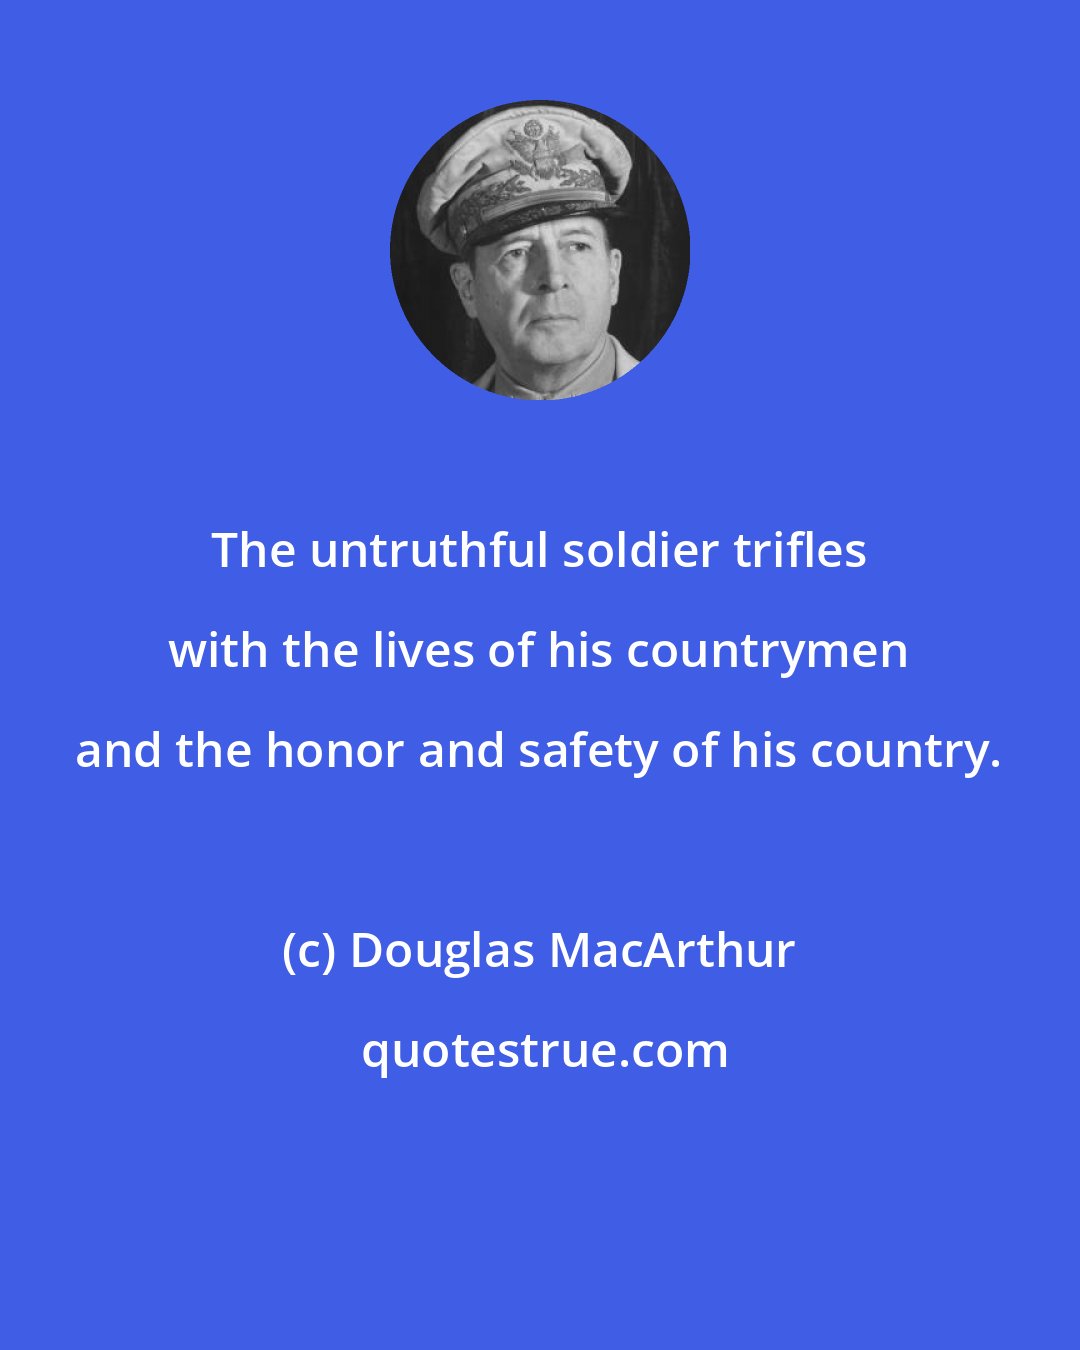 Douglas MacArthur: The untruthful soldier trifles with the lives of his countrymen and the honor and safety of his country.